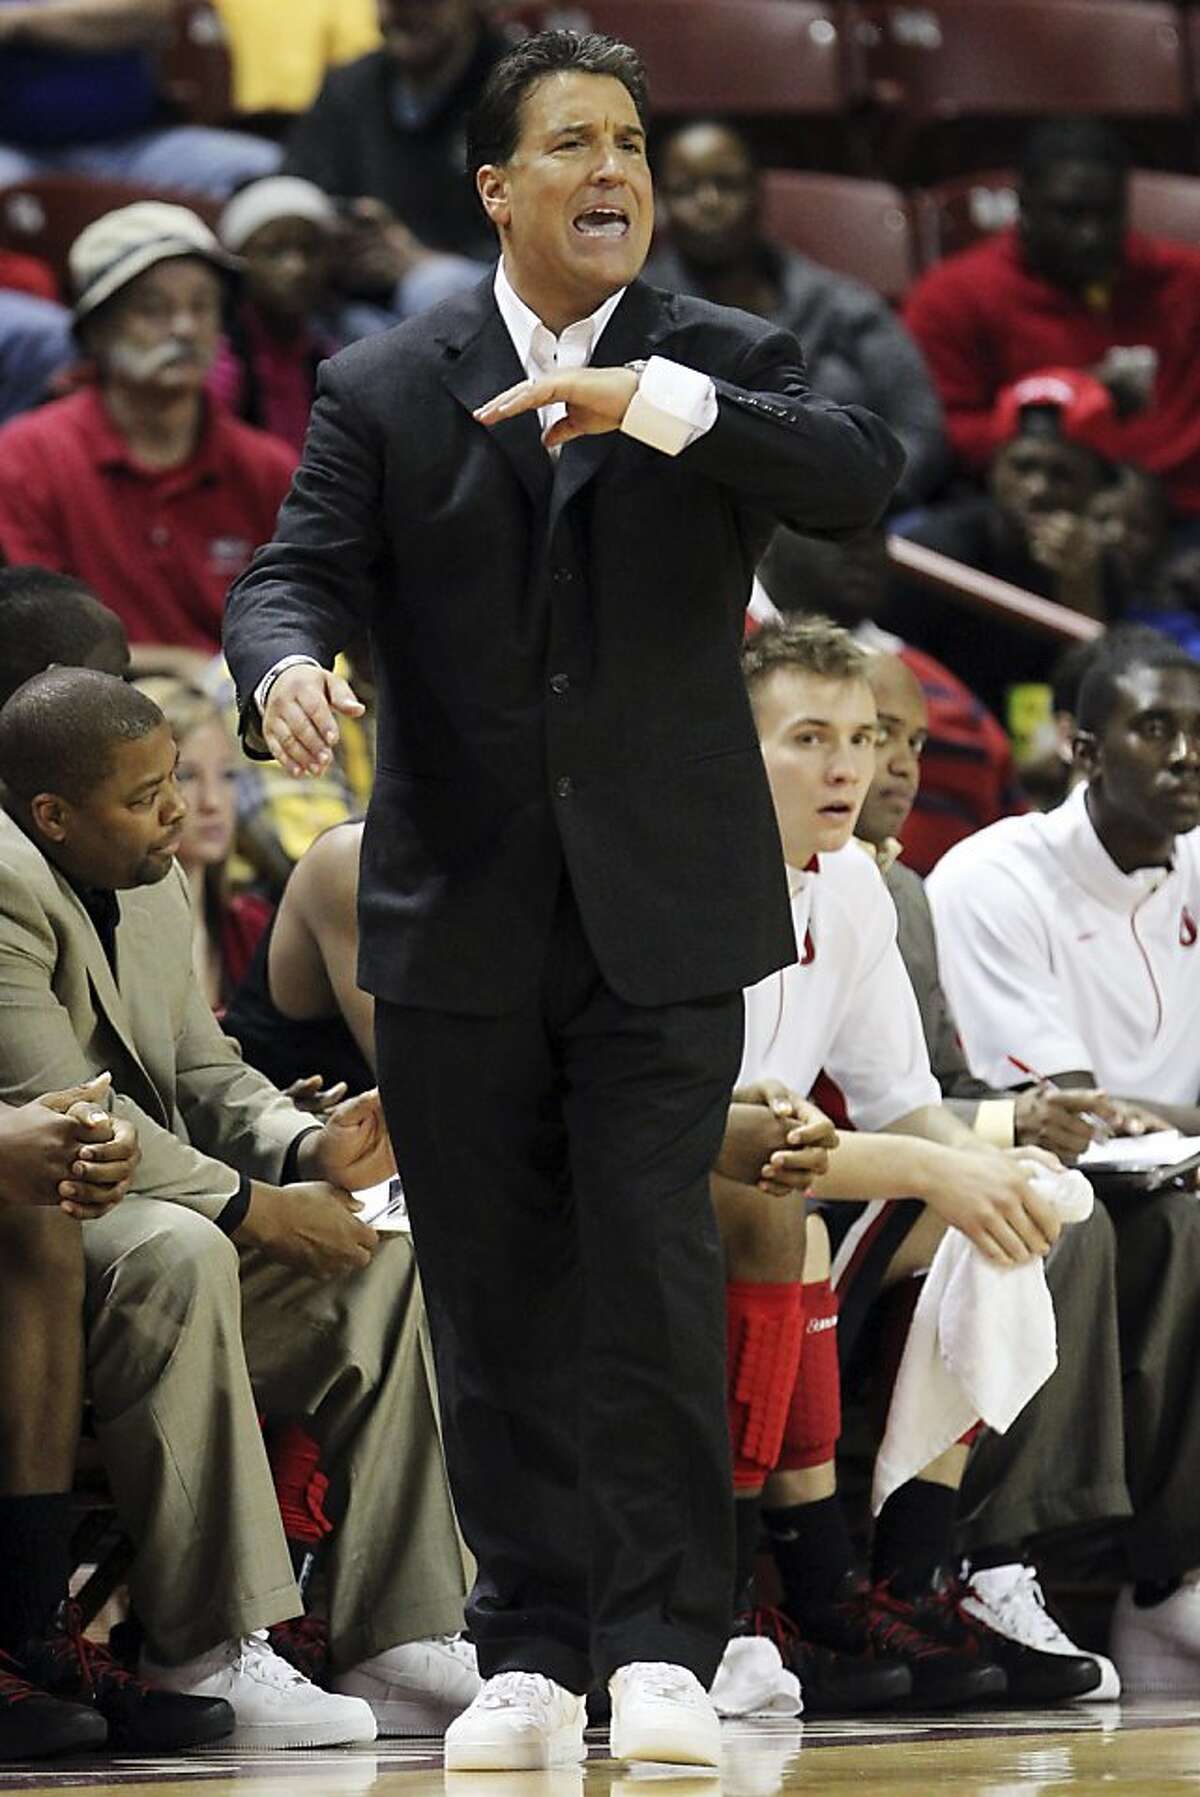 St. John's head coach Steve Lavin shouts instructions to his players during the second half of an NCAA college basketball game against Baylor at the Charleston Classic at TD Arena, Sunday Nov. 18, 2012, in Charleston, S.C. Baylor won 97-78. (AP Photo/Alice Keeney)